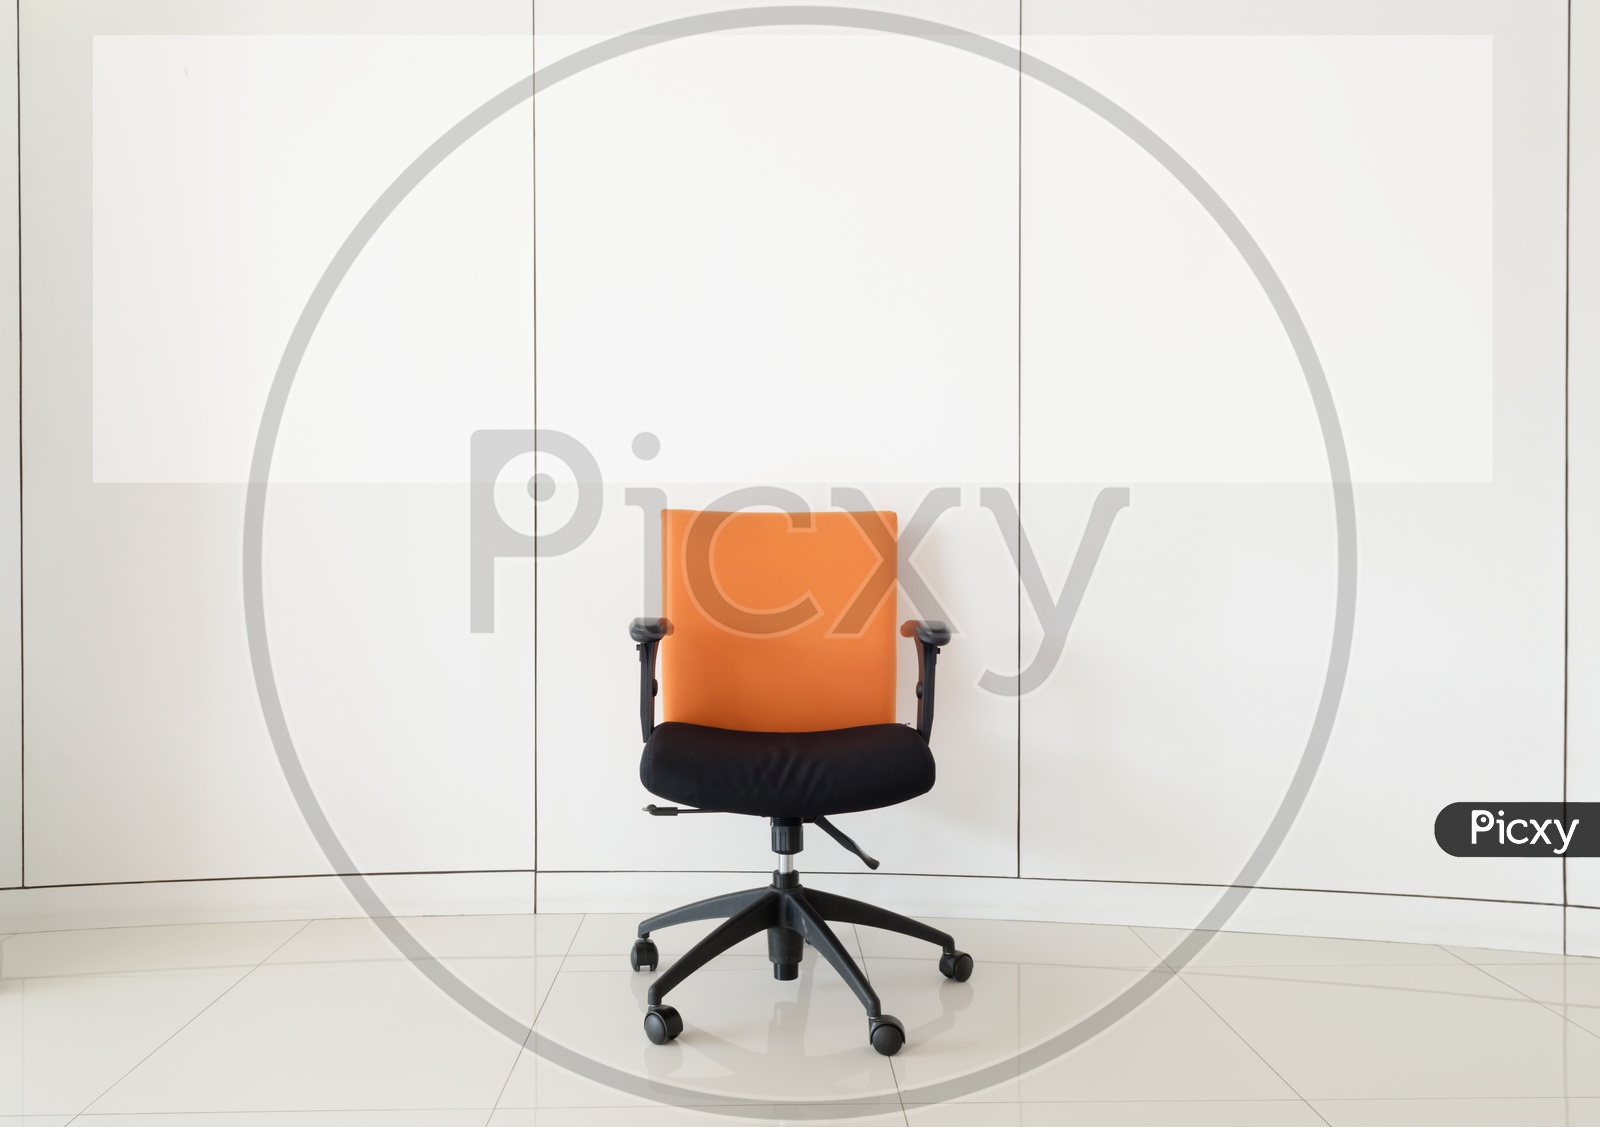 A Single chair in the office